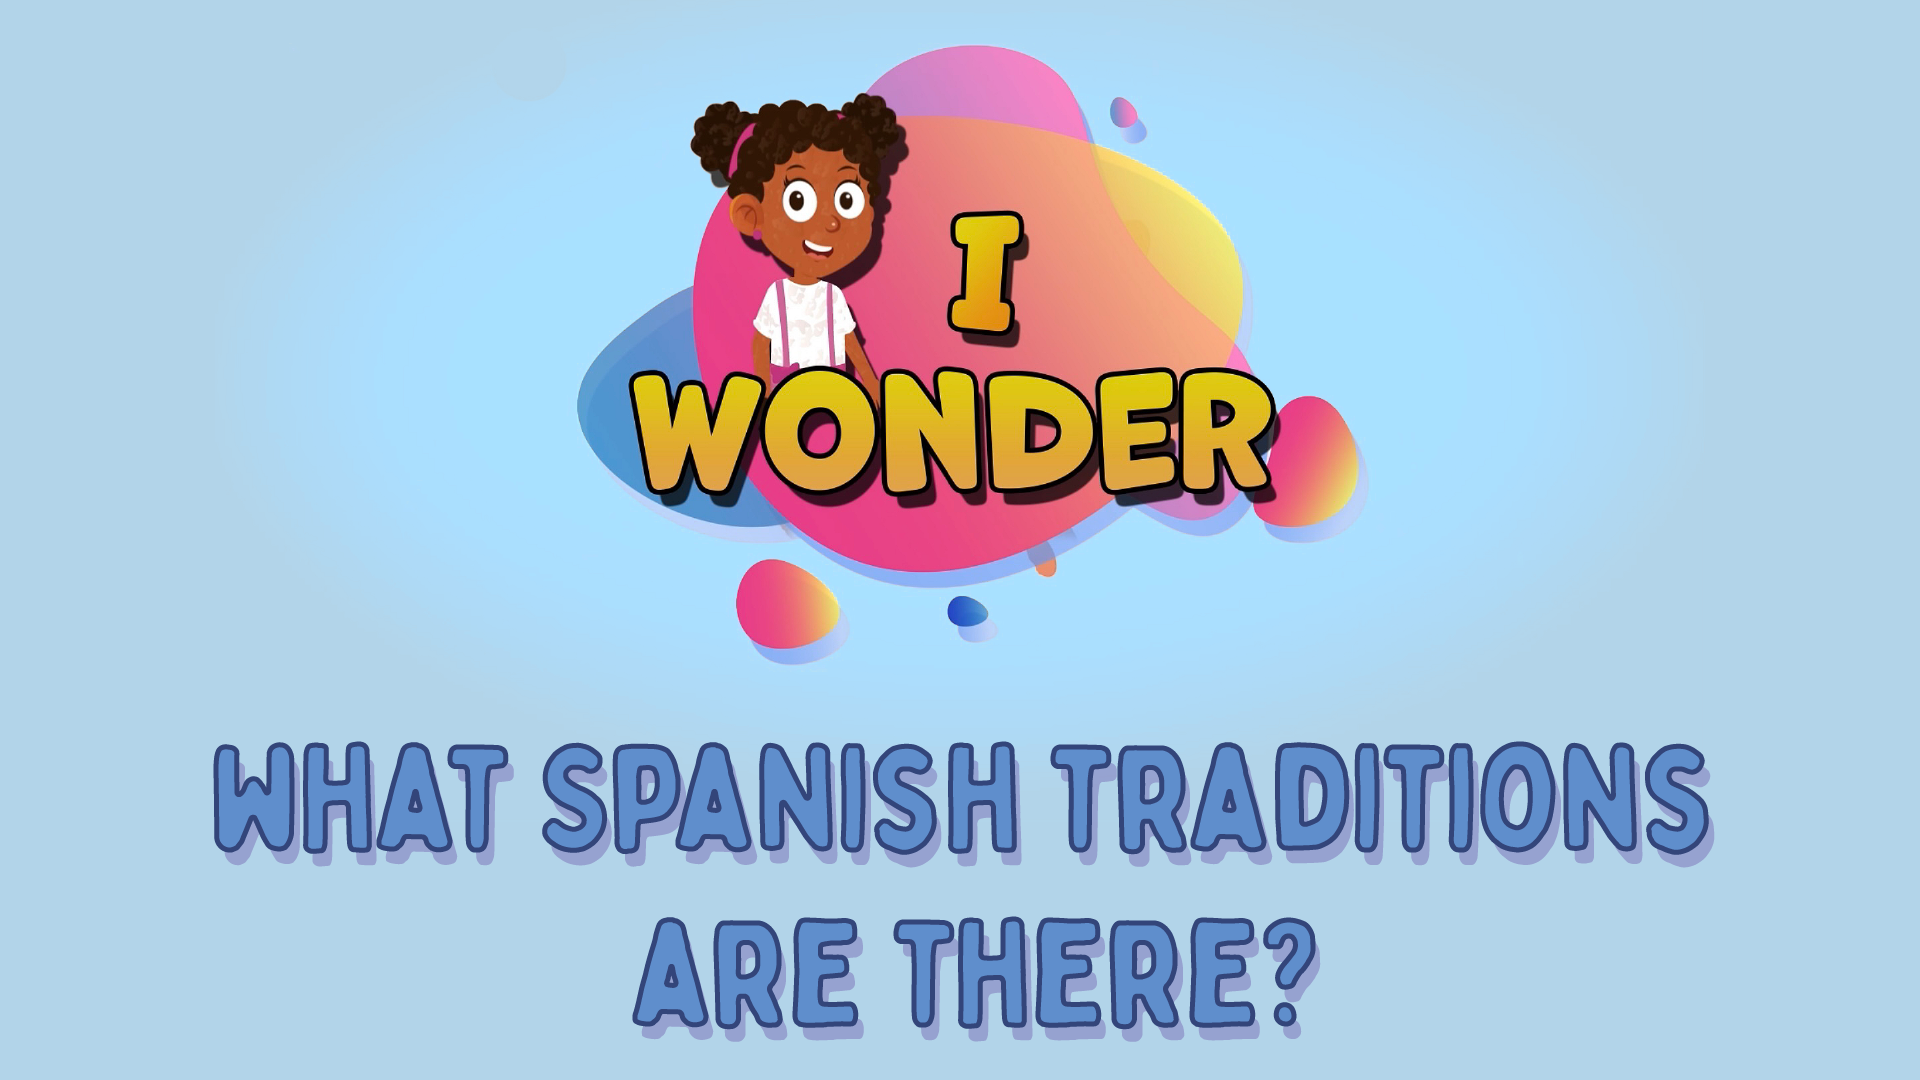 What Spanish Traditions Are There?